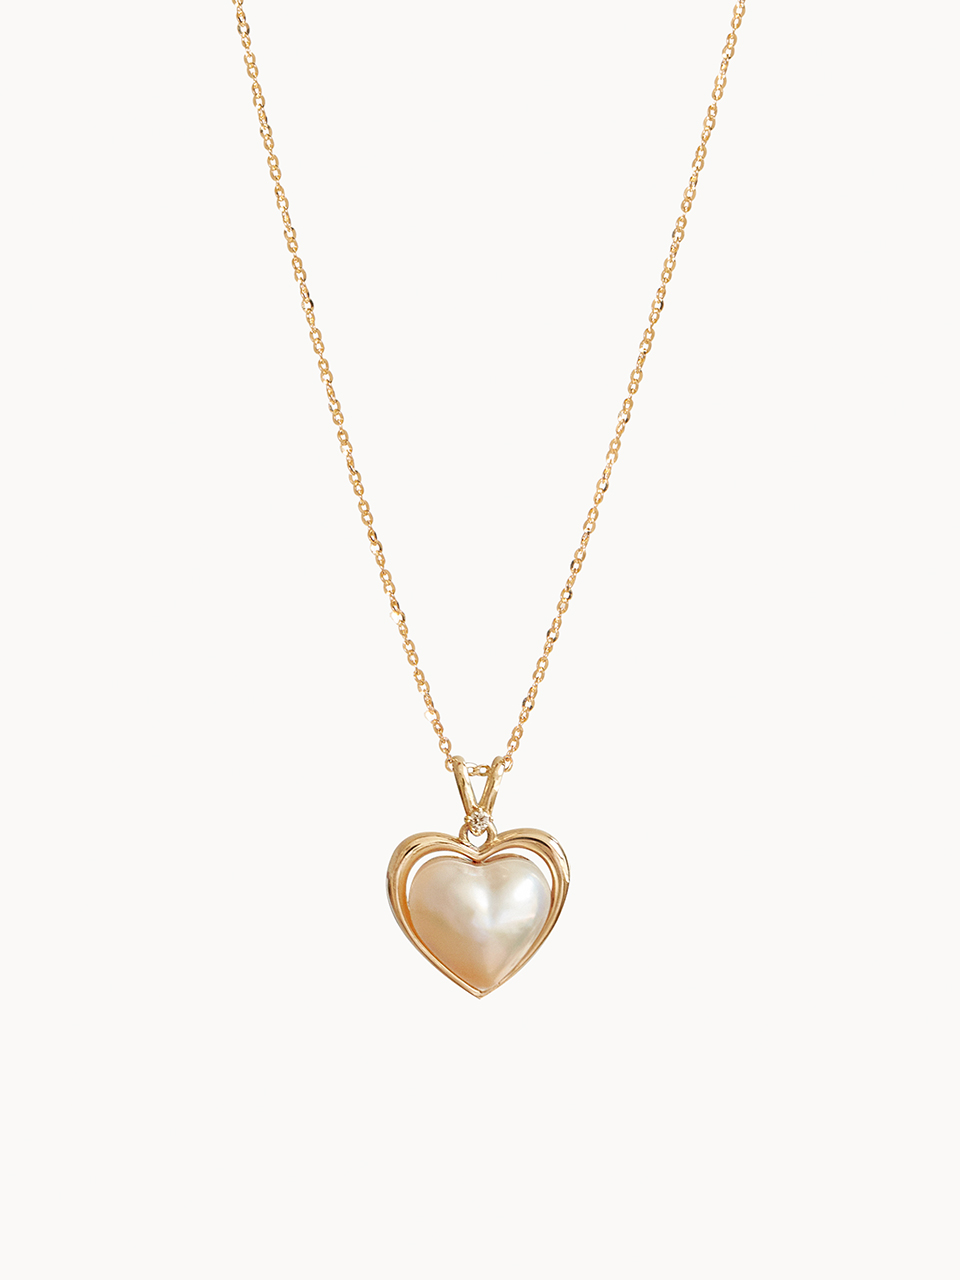 Heart Mabe Pearl Necklace